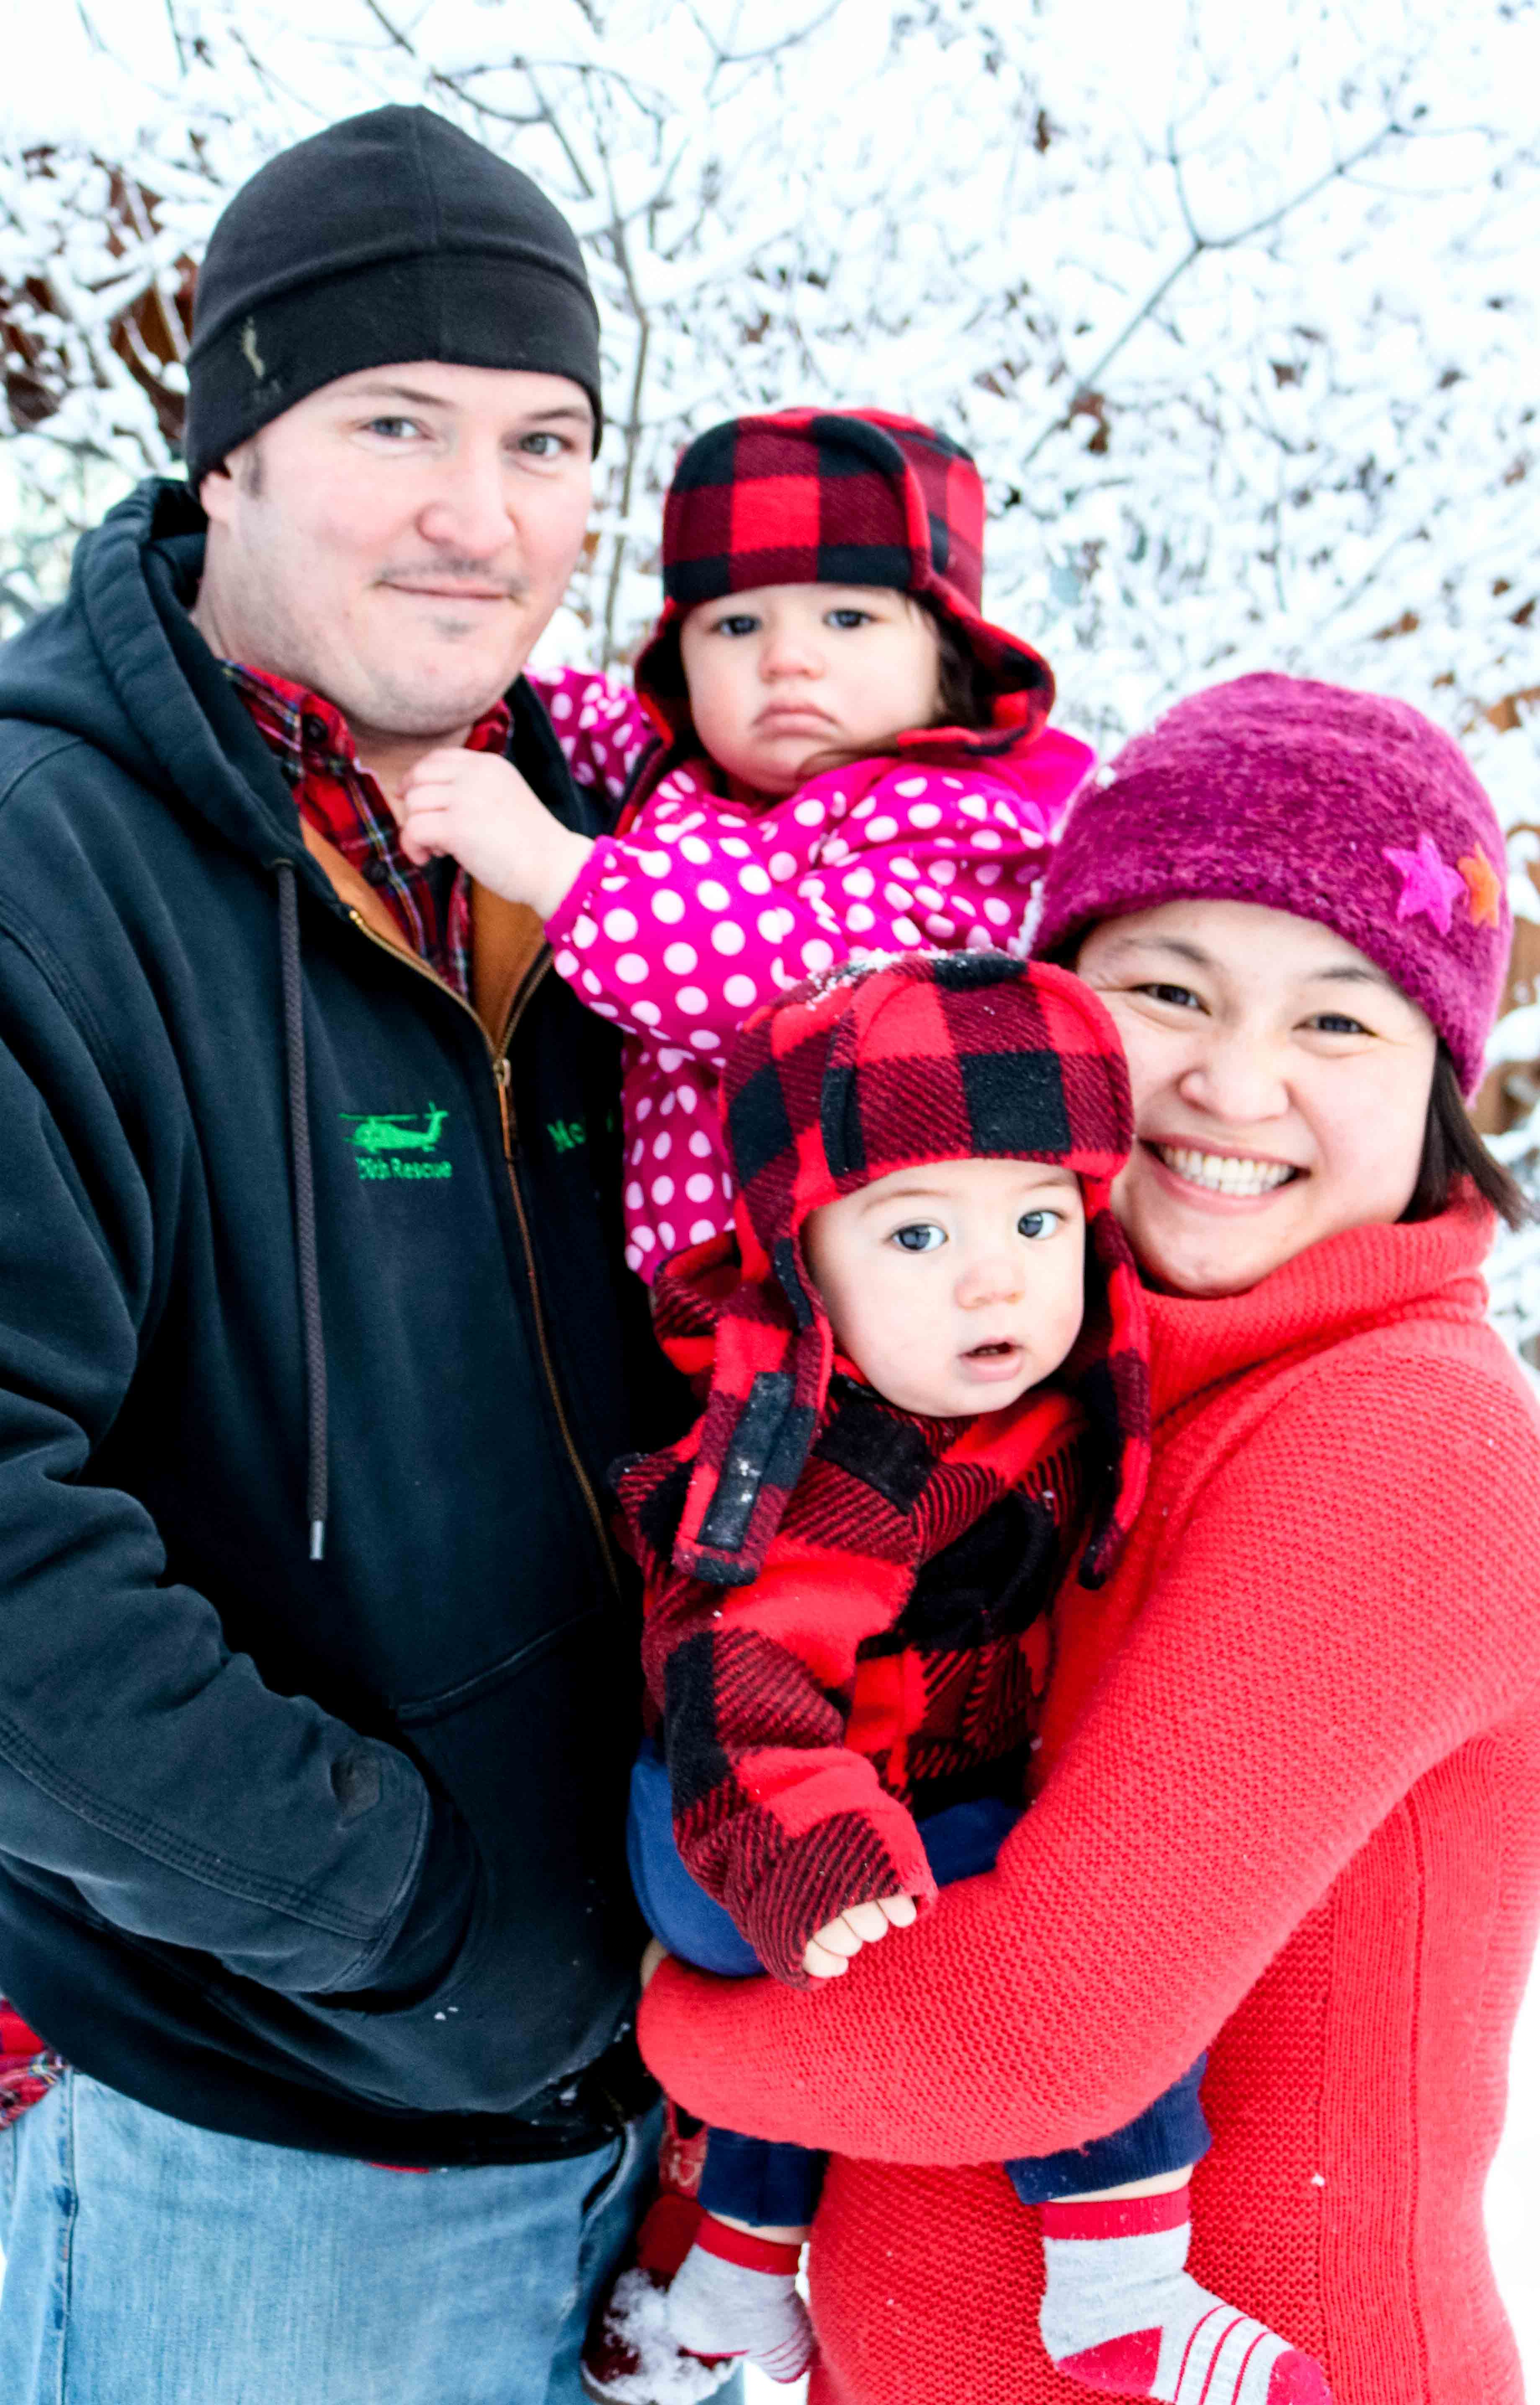 Darren and Chingwen from Alaska, United States